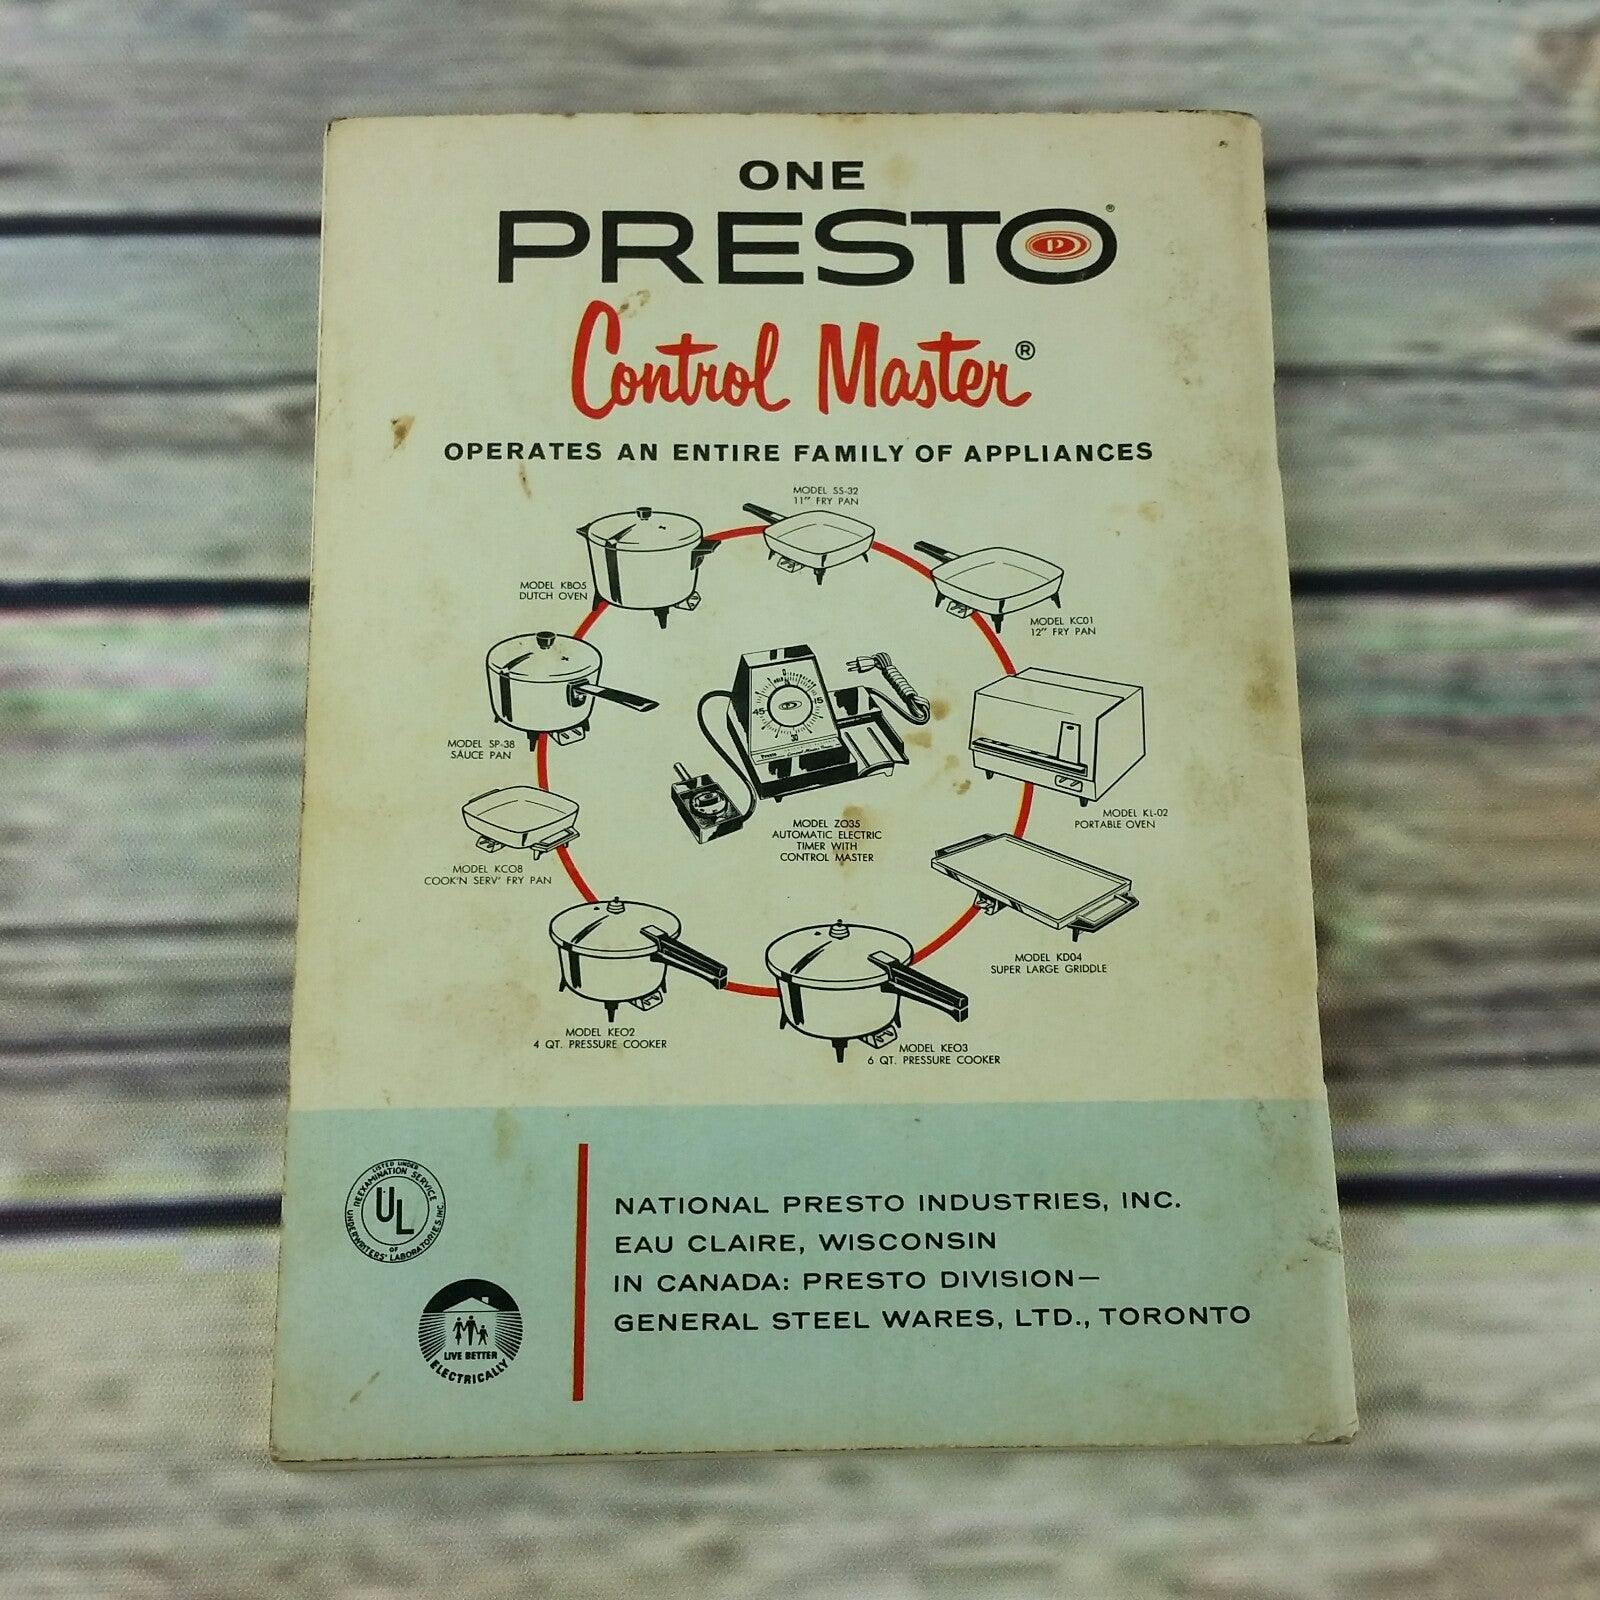 Vintage Cookbook Presto Pressure Cooker Instructions Cooking Time Tables 1961 Recipes Manual Booklet - At Grandma's Table